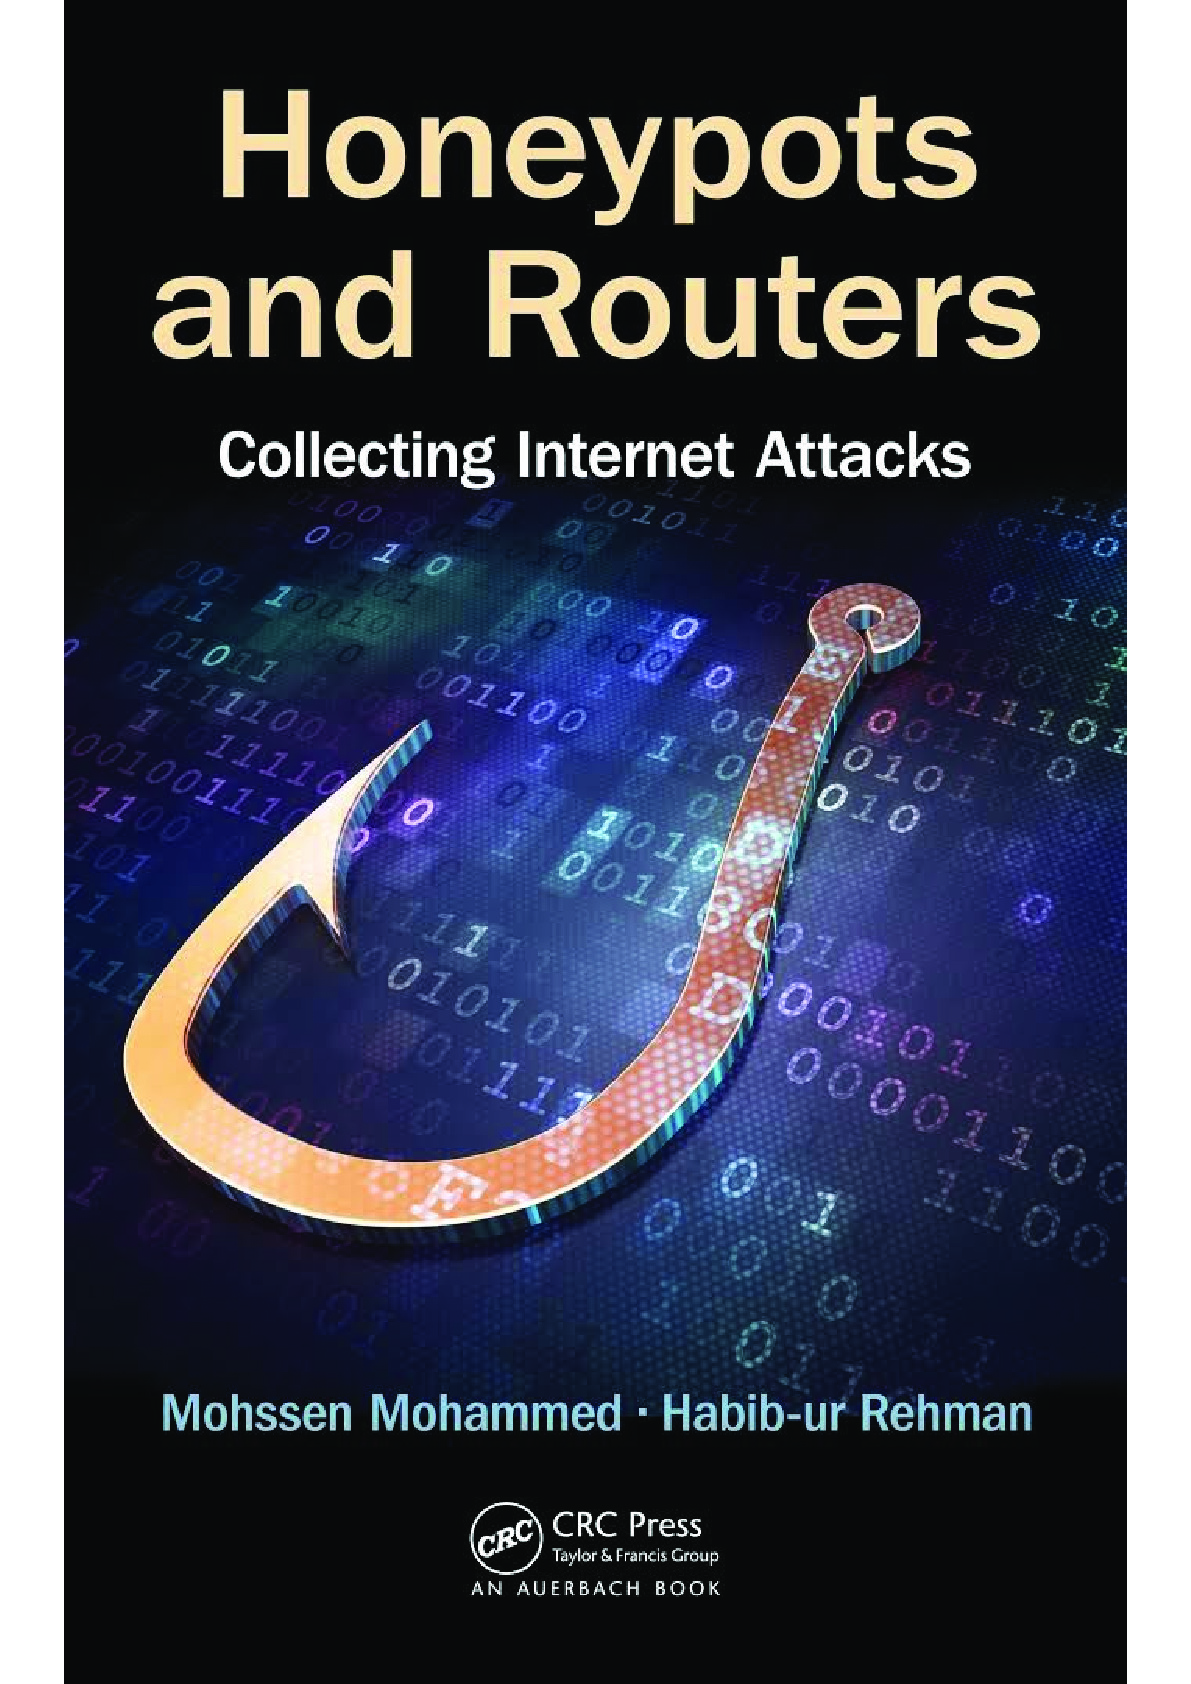 21. Honeypots and Routers_ Collecting Internet Attacks